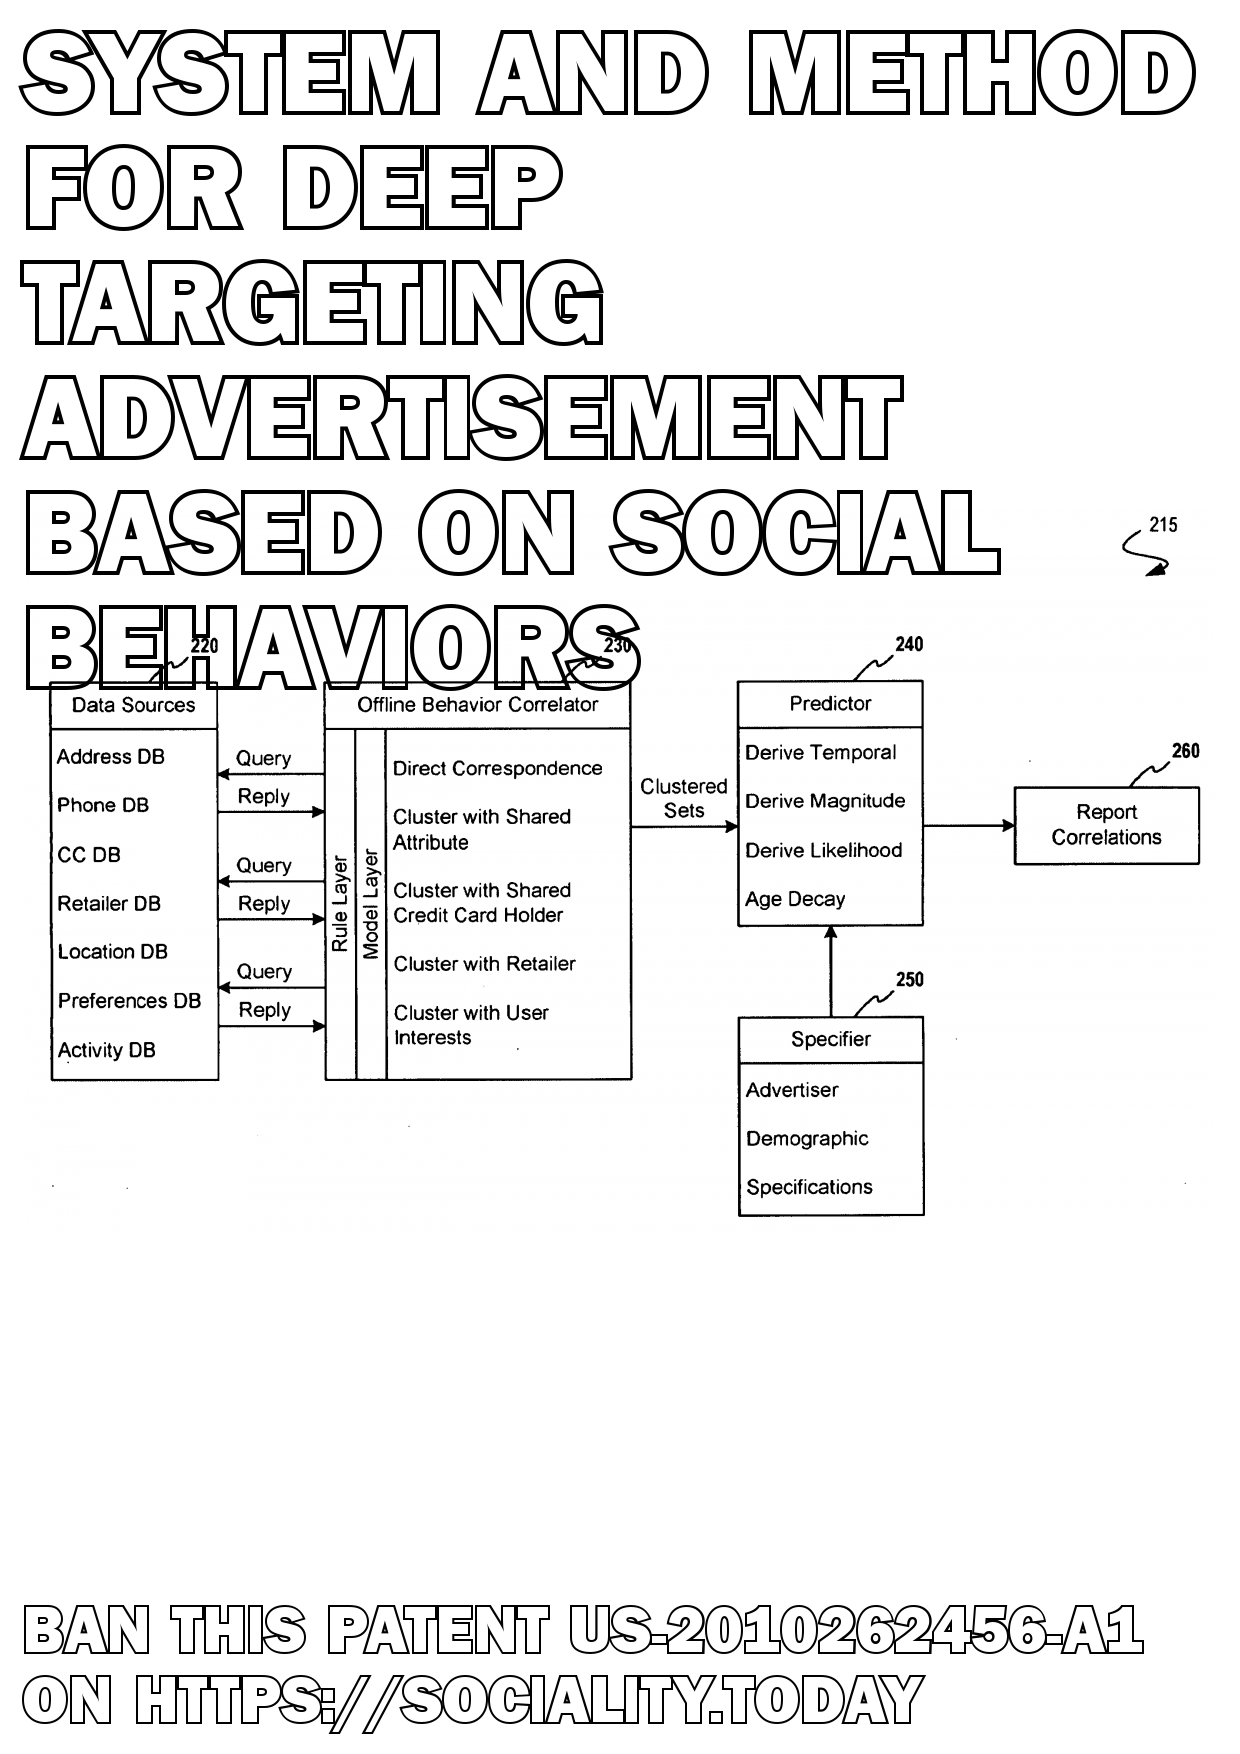 System and Method for Deep Targeting Advertisement Based on Social Behaviors  - US-2010262456-A1